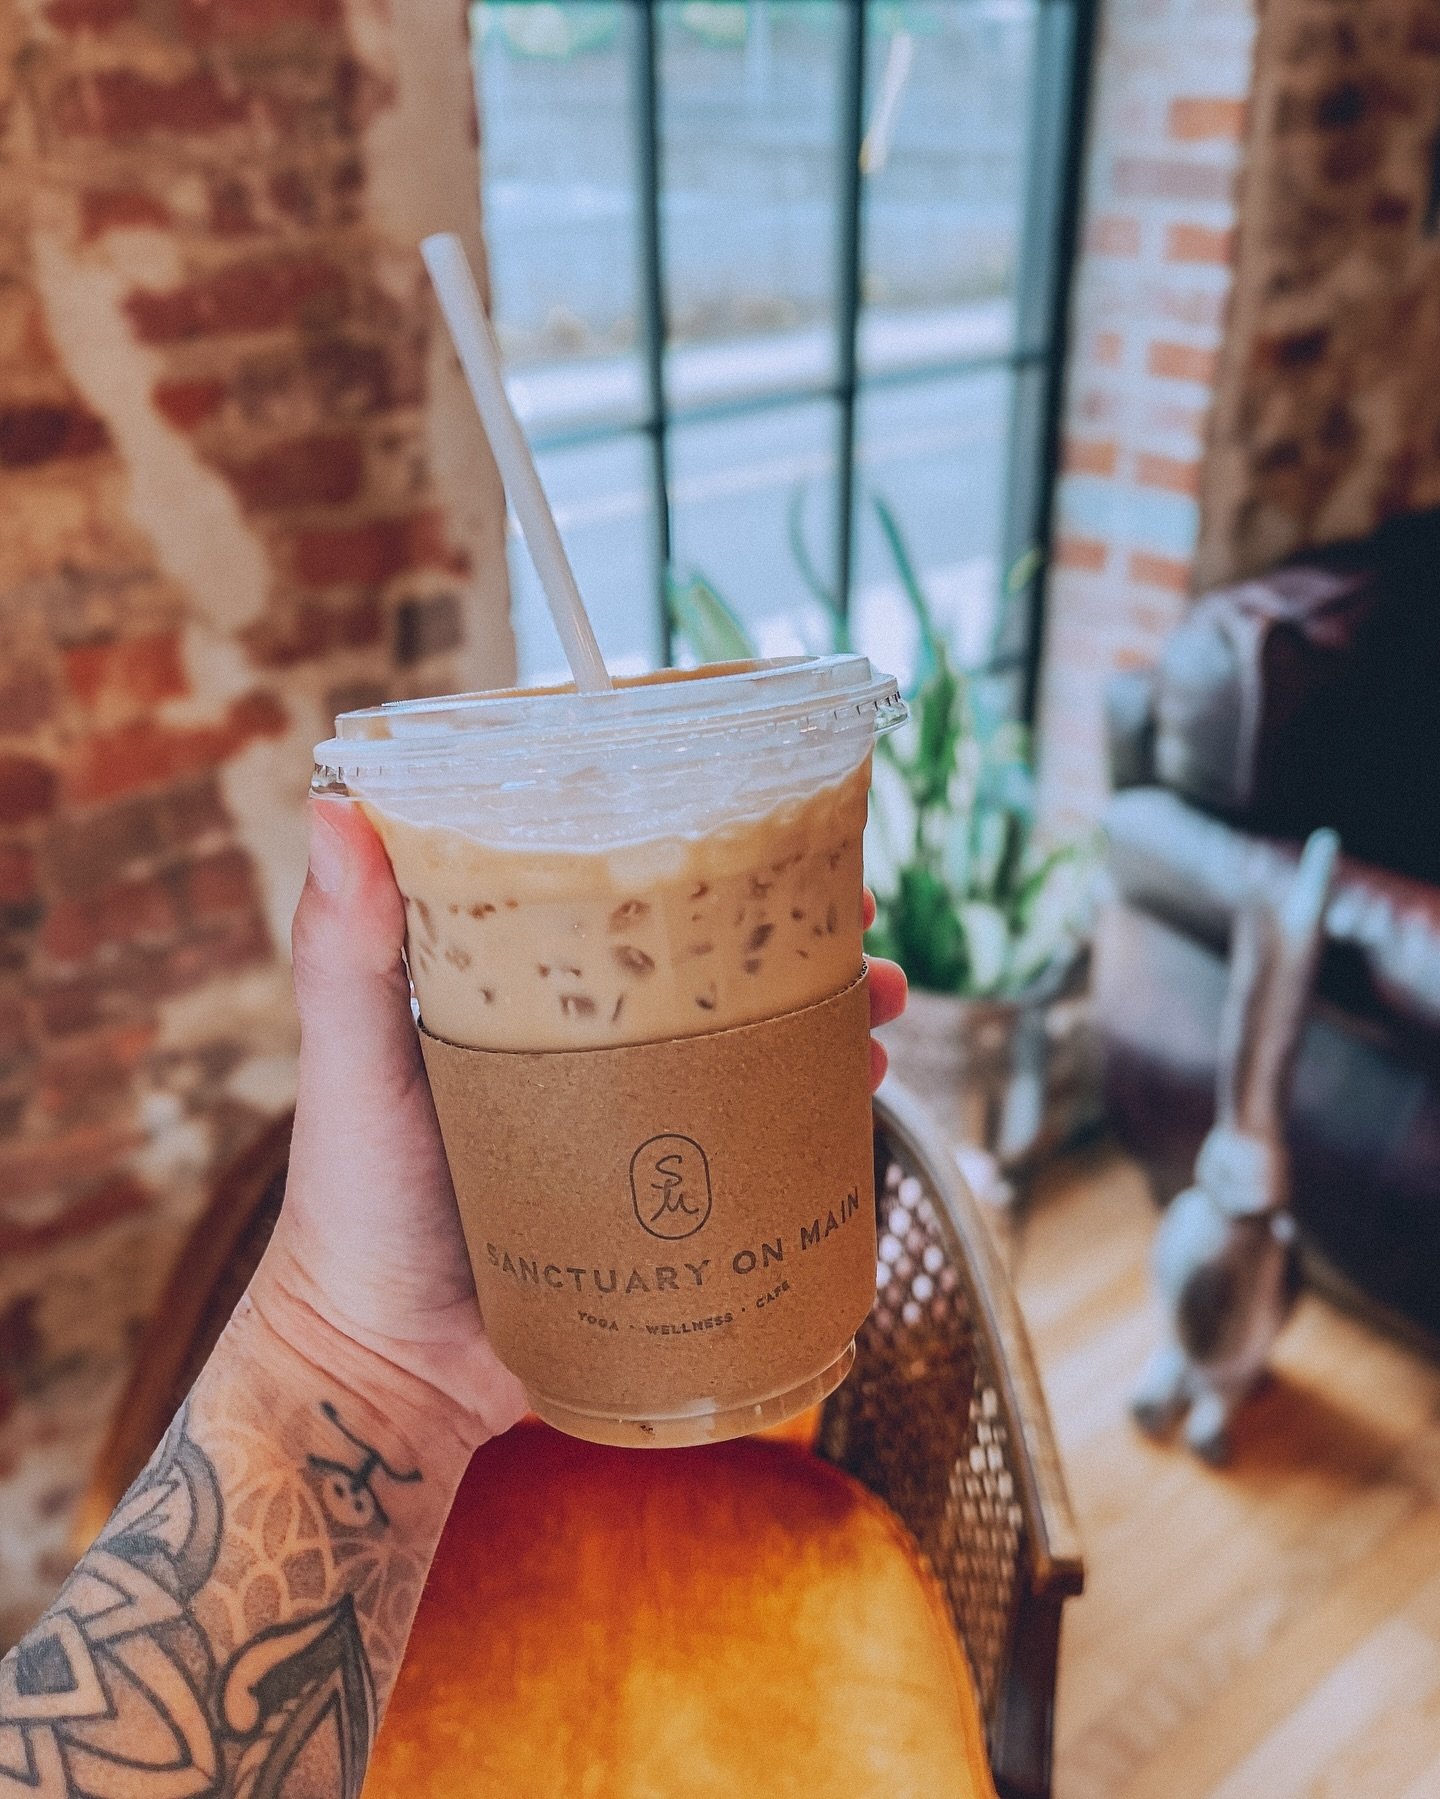 It is absolutely lovely outside this morning, and an iced latte just makes it even better! 😋

Come on in today for all your yoga, wellness, and cafe needs&hellip; OR snag yours to-go on the 🧋 Grub Hub App 🧋 if you have a busy day! Either way we ca